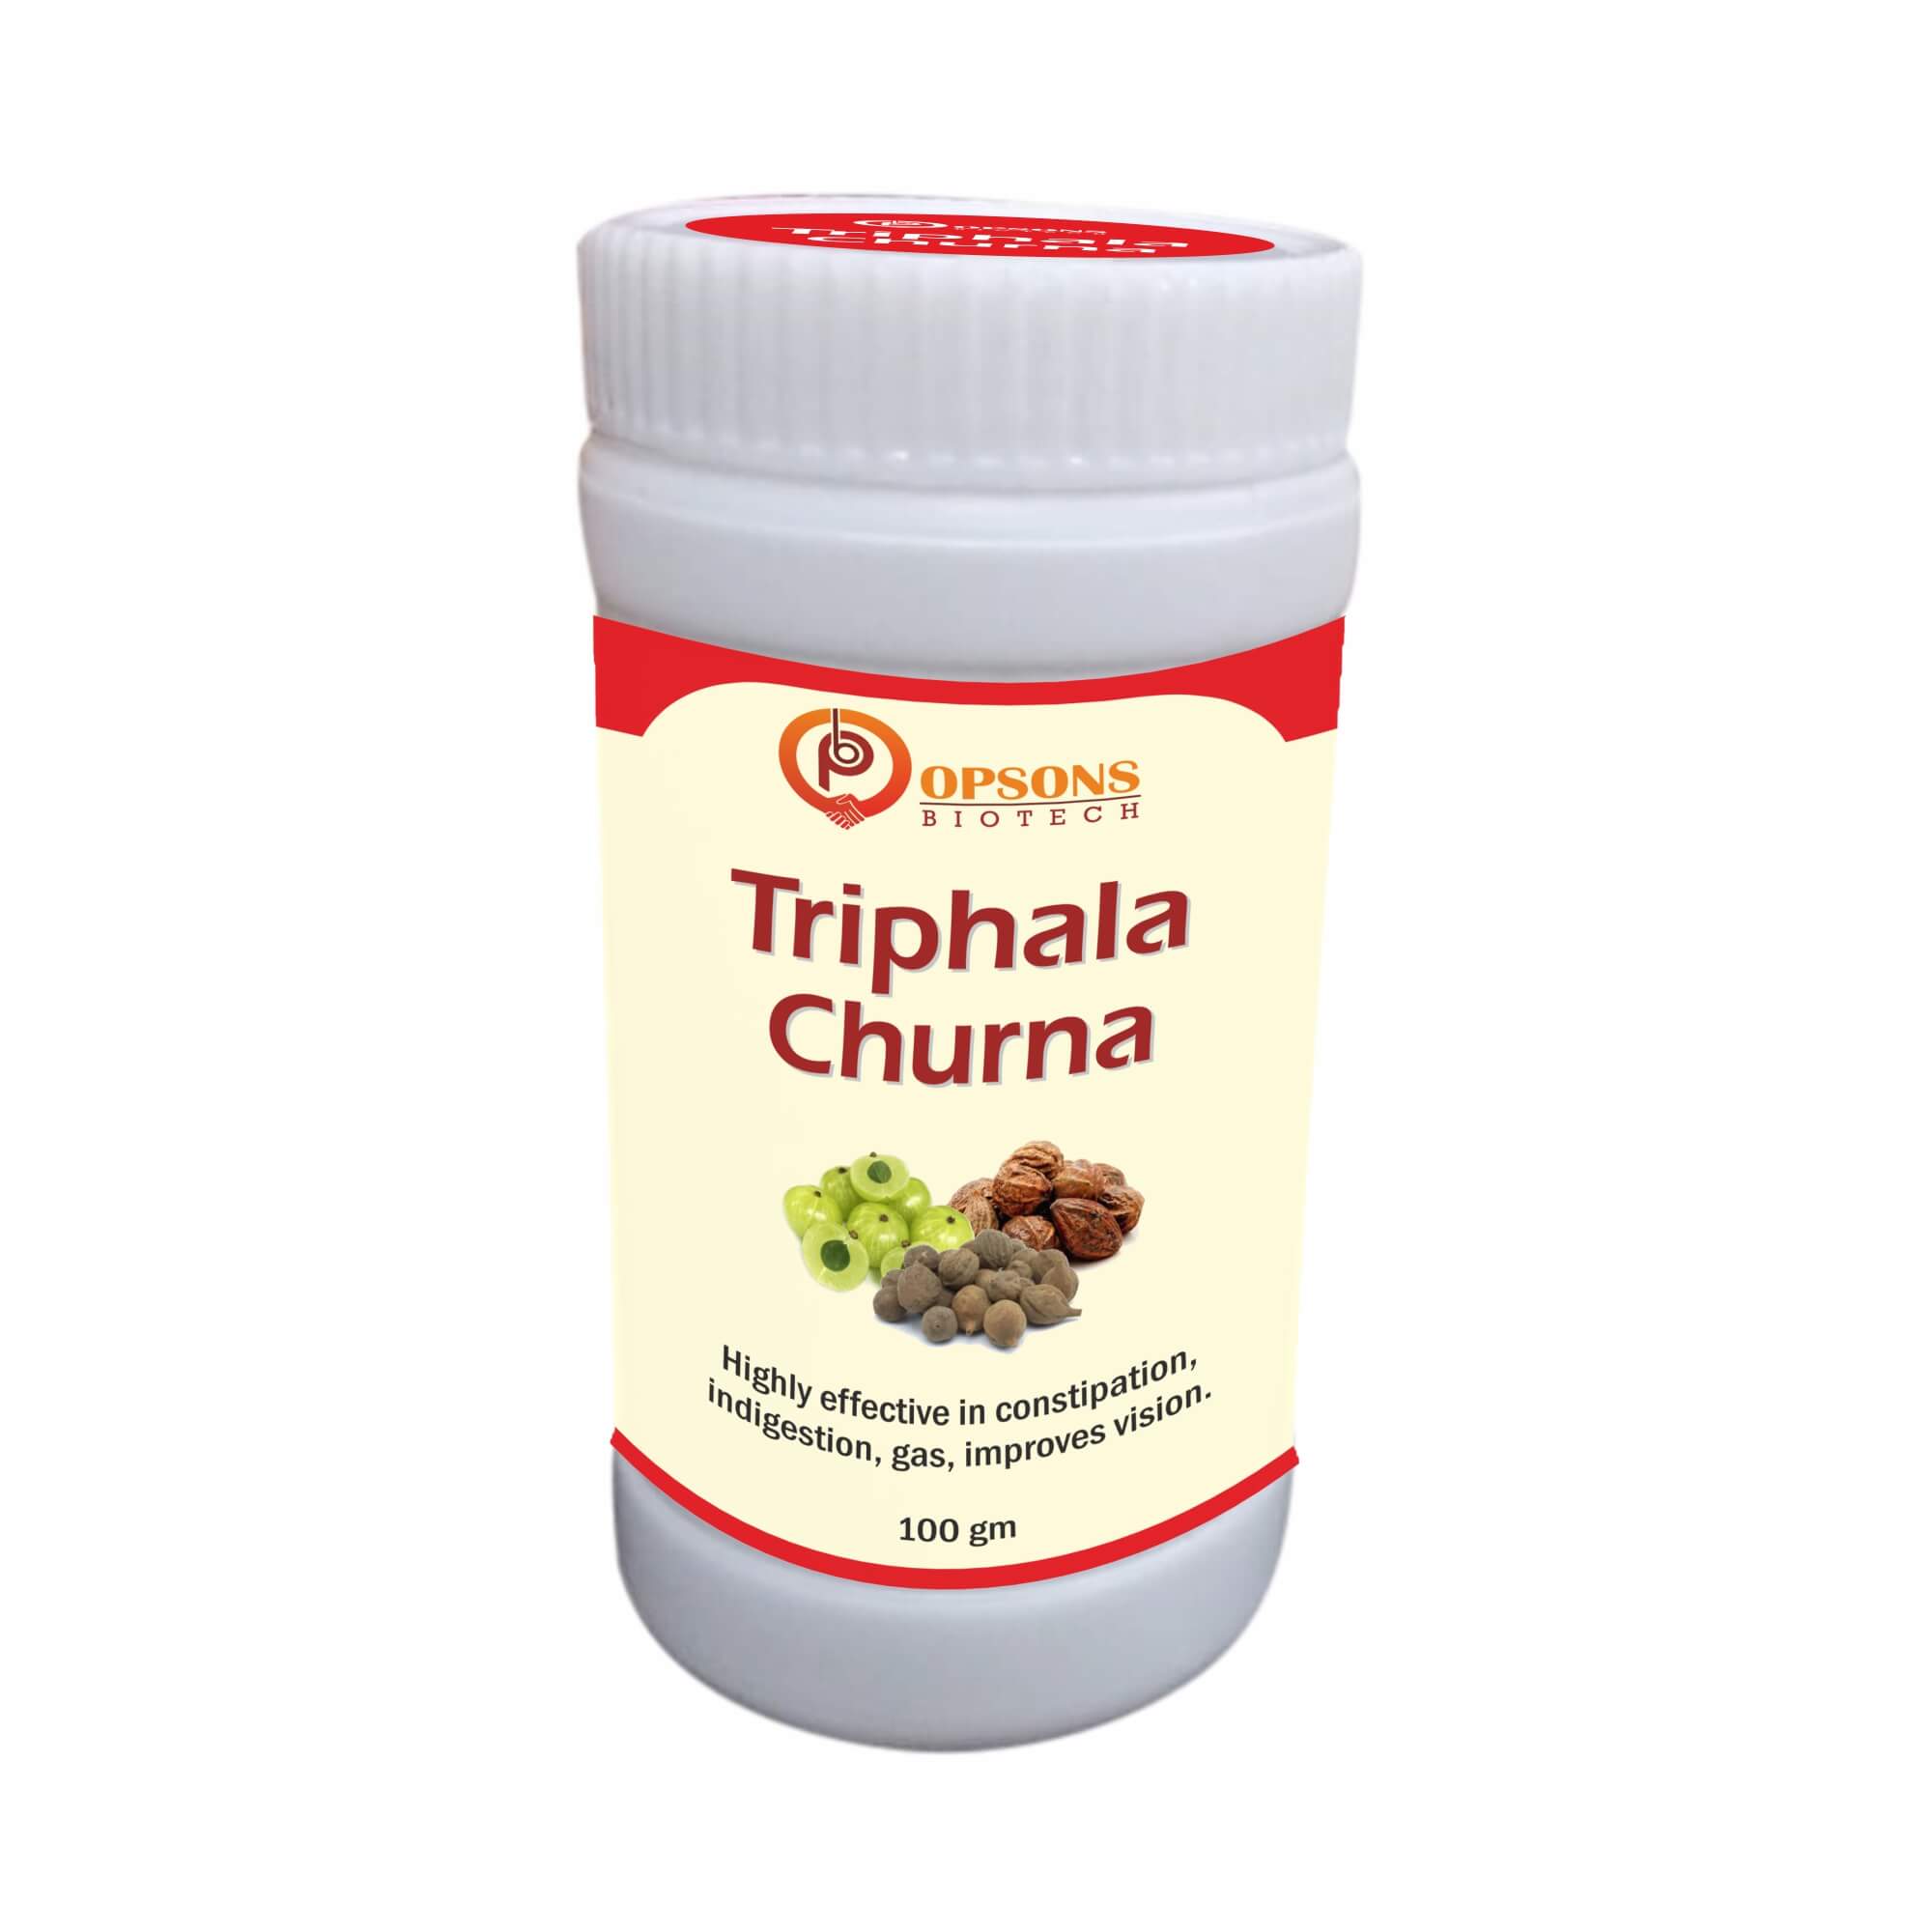 Product Name: Triphala Churana, Compositions of Highly effective in coonstipation,indigestion,gas,improves vision are Highly effective in coonstipation,indigestion,gas,improves vision - Opsons Biotech